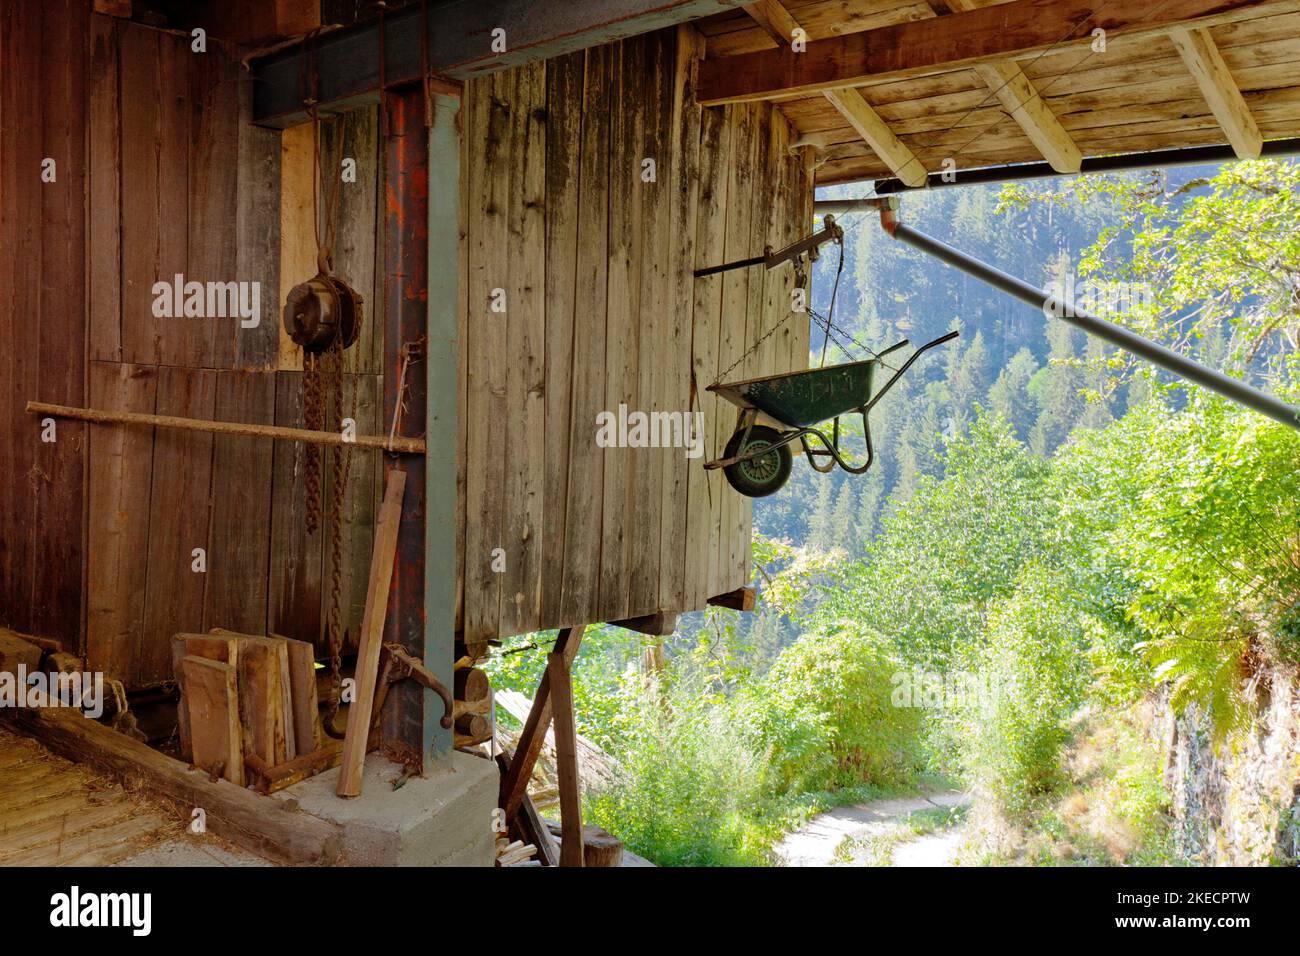 Wheelbarrow hangs secured under the roof of the barn in the South Tyrolean Ulten Valley Stock Photo